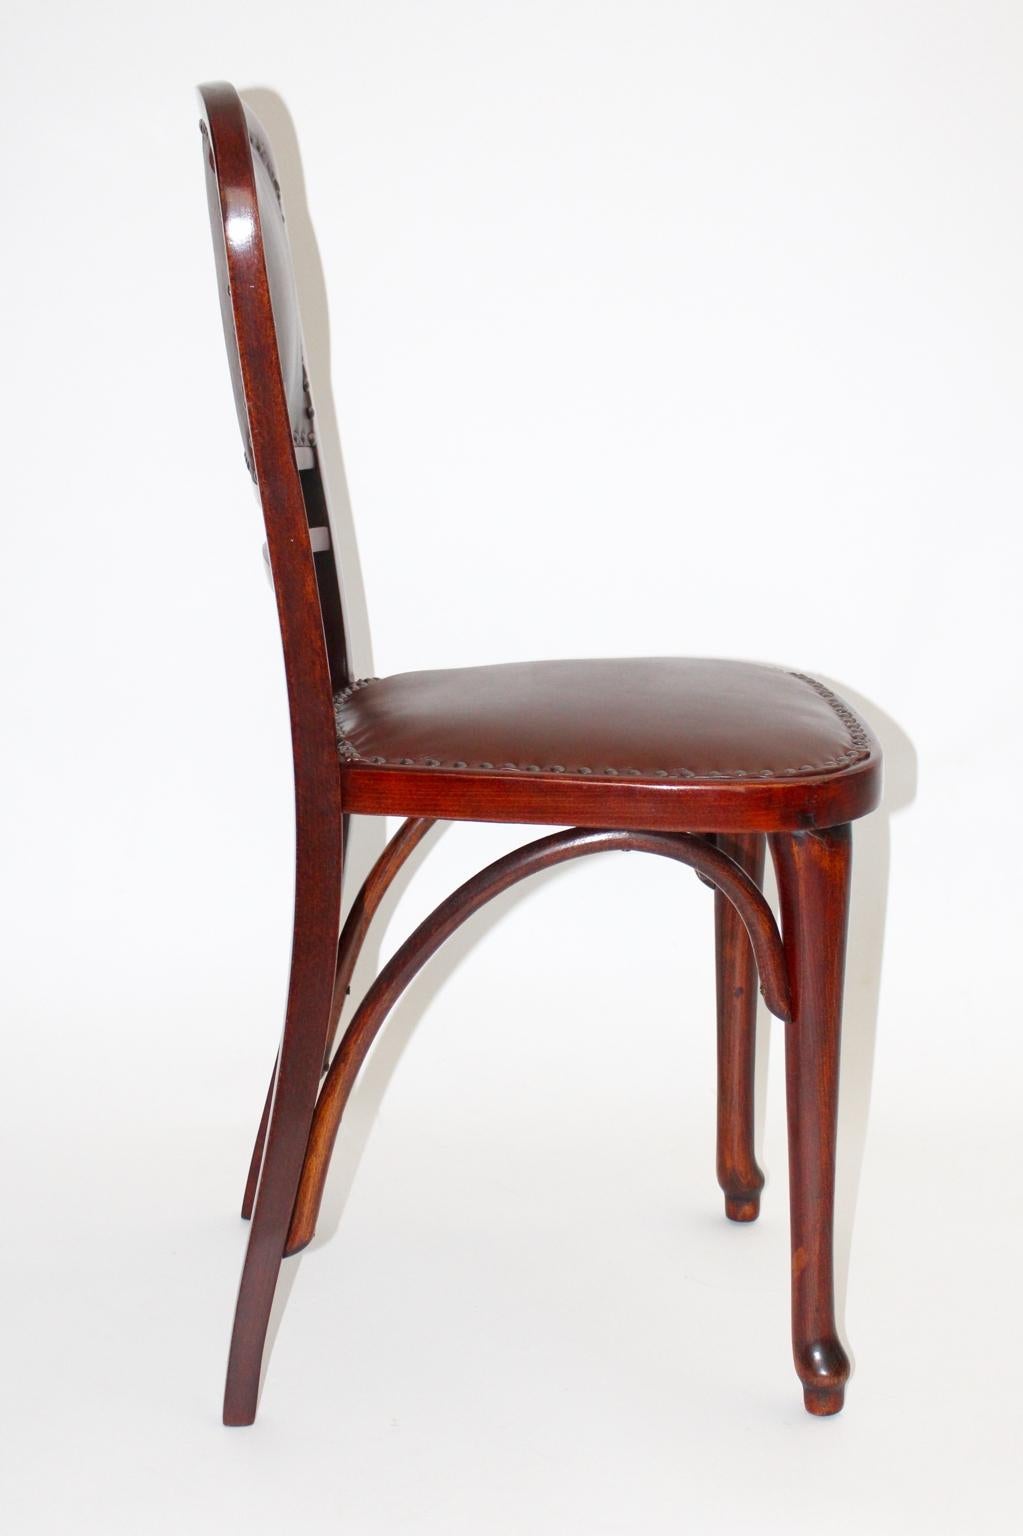 Austrian Jugendstil Vintage Beech and Leather Chair Kat. Nr. 491 by Thonet, circa 1904